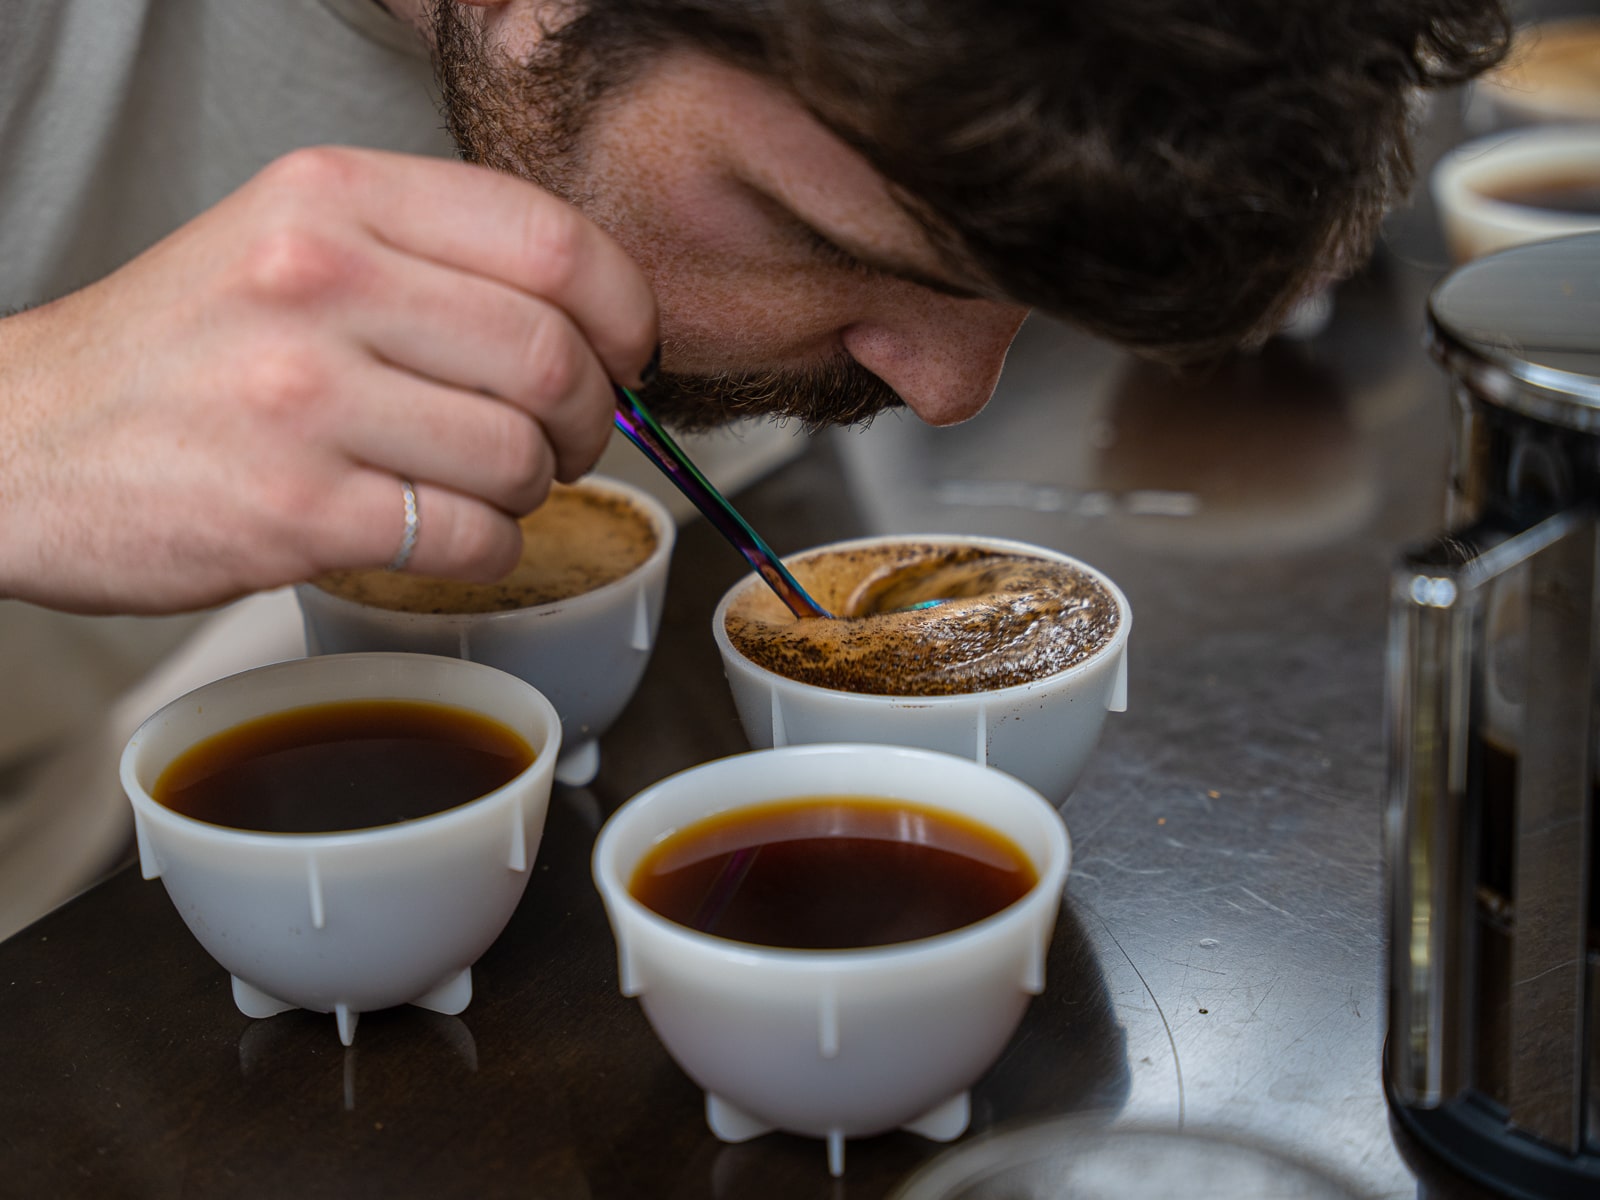 Breaking the crust in a cupping bowl